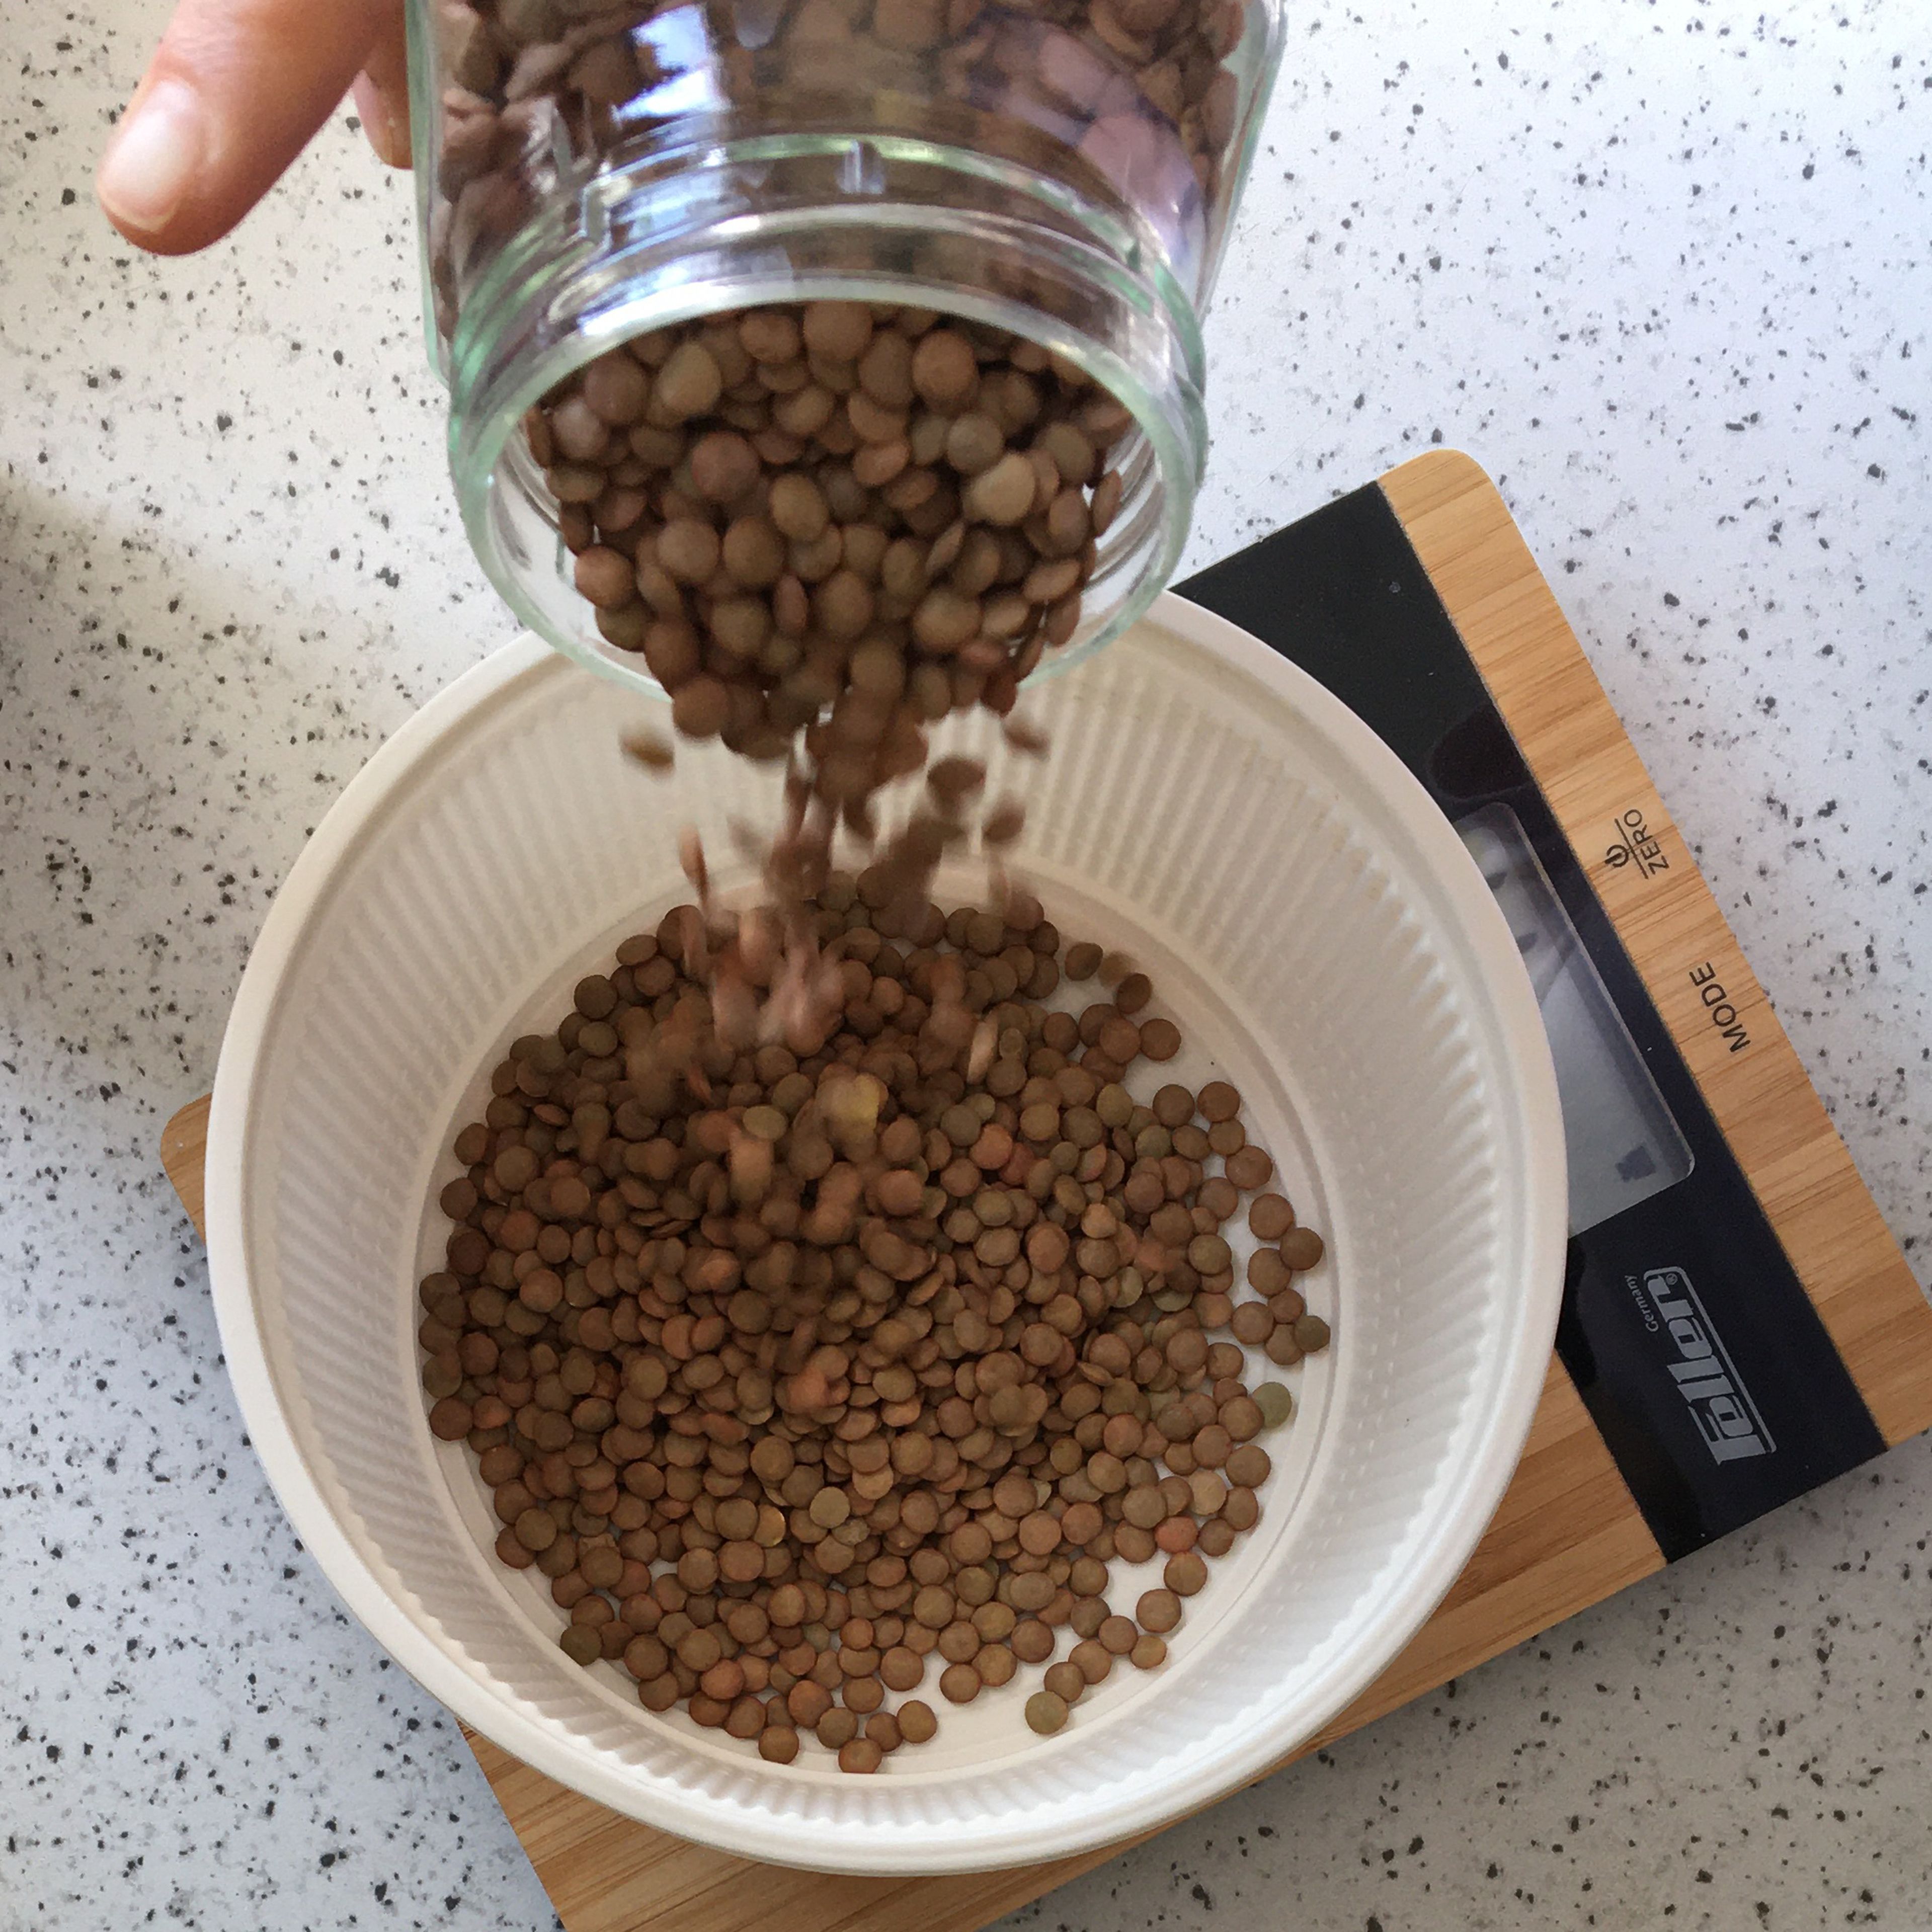 Wash the lentils and soak in cold water for at least two hours. Then rinse and add to a pot with enough water to cook. It differs from “lentil to lentil” and also “region to region” but they will need at least about 45-60 min to cook completely.